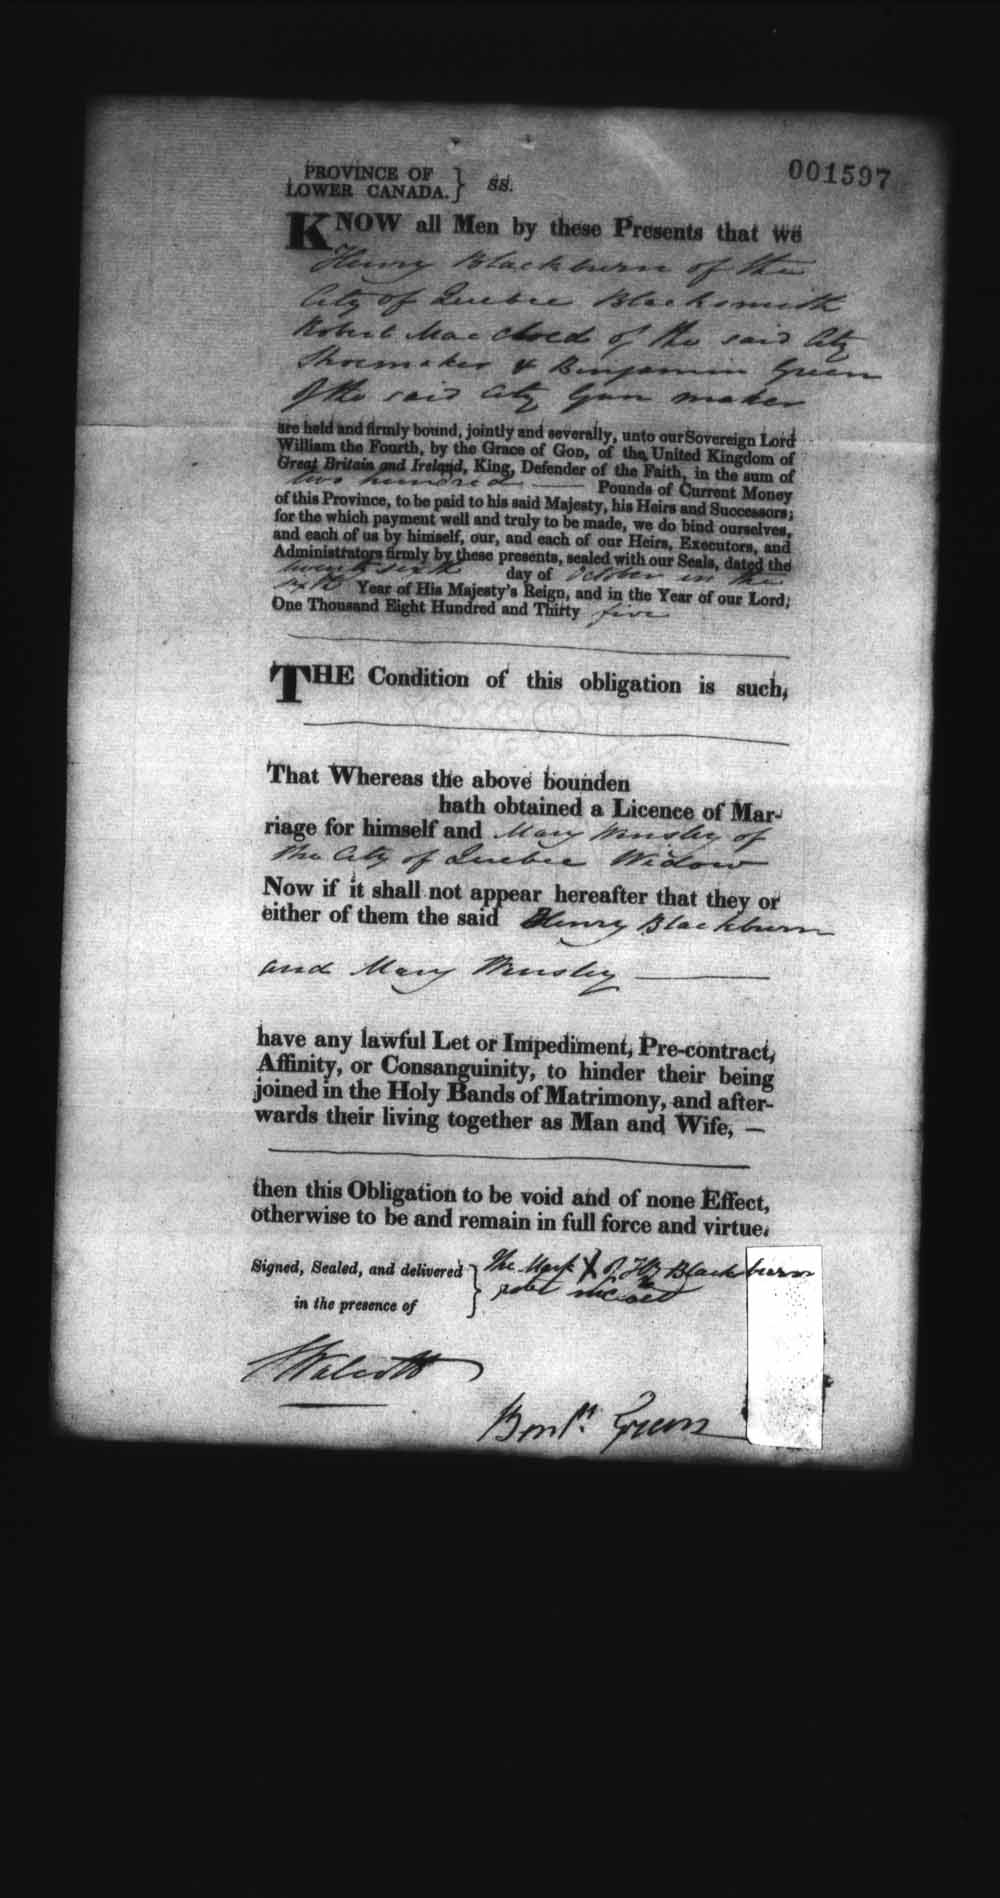 Digitized page of Upper and Lower Canada Marriage Bonds (1779-1865) for Image No.: e008237917